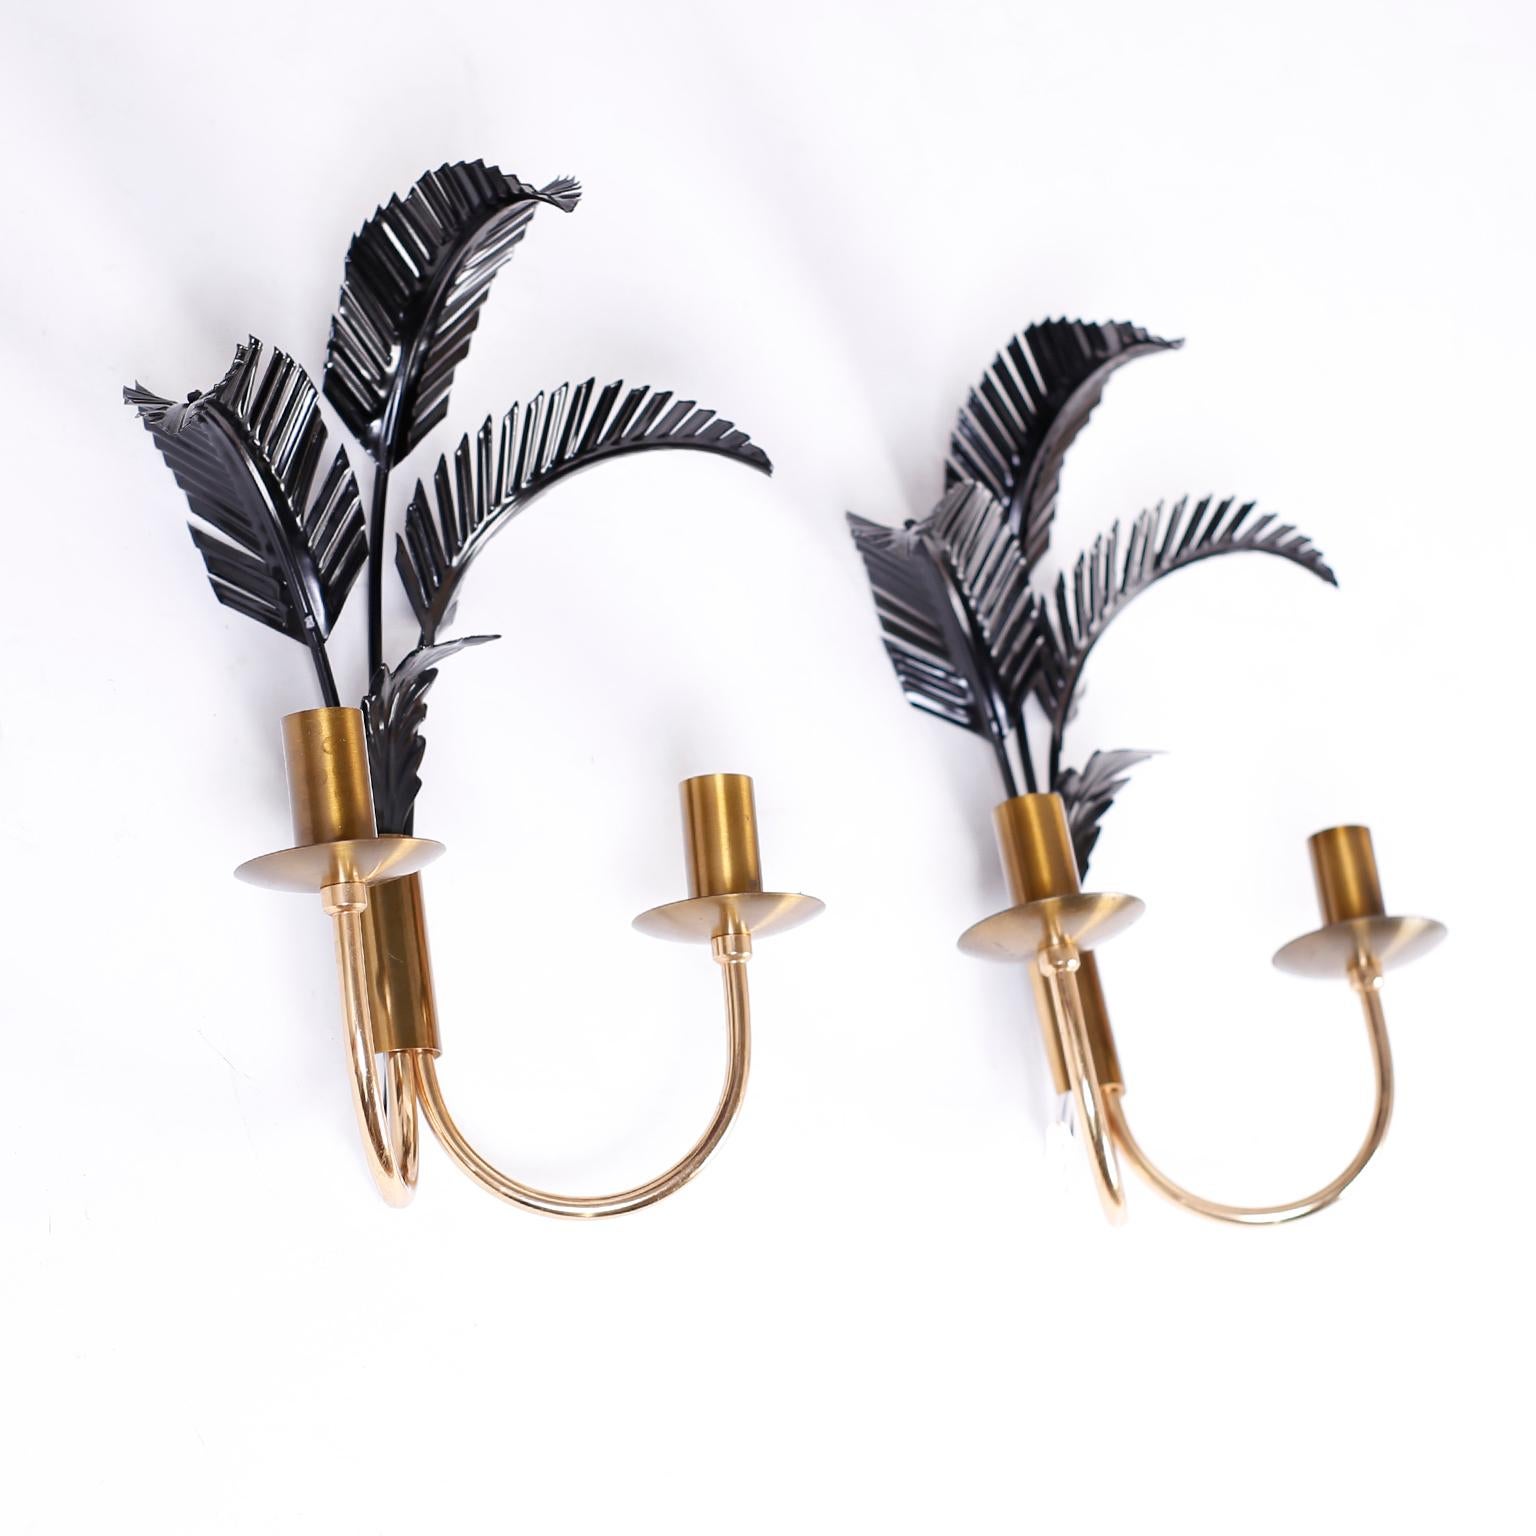 Chic pair of mid century wall sconces with black tole palm tree leaves over brass arms and candle cups.